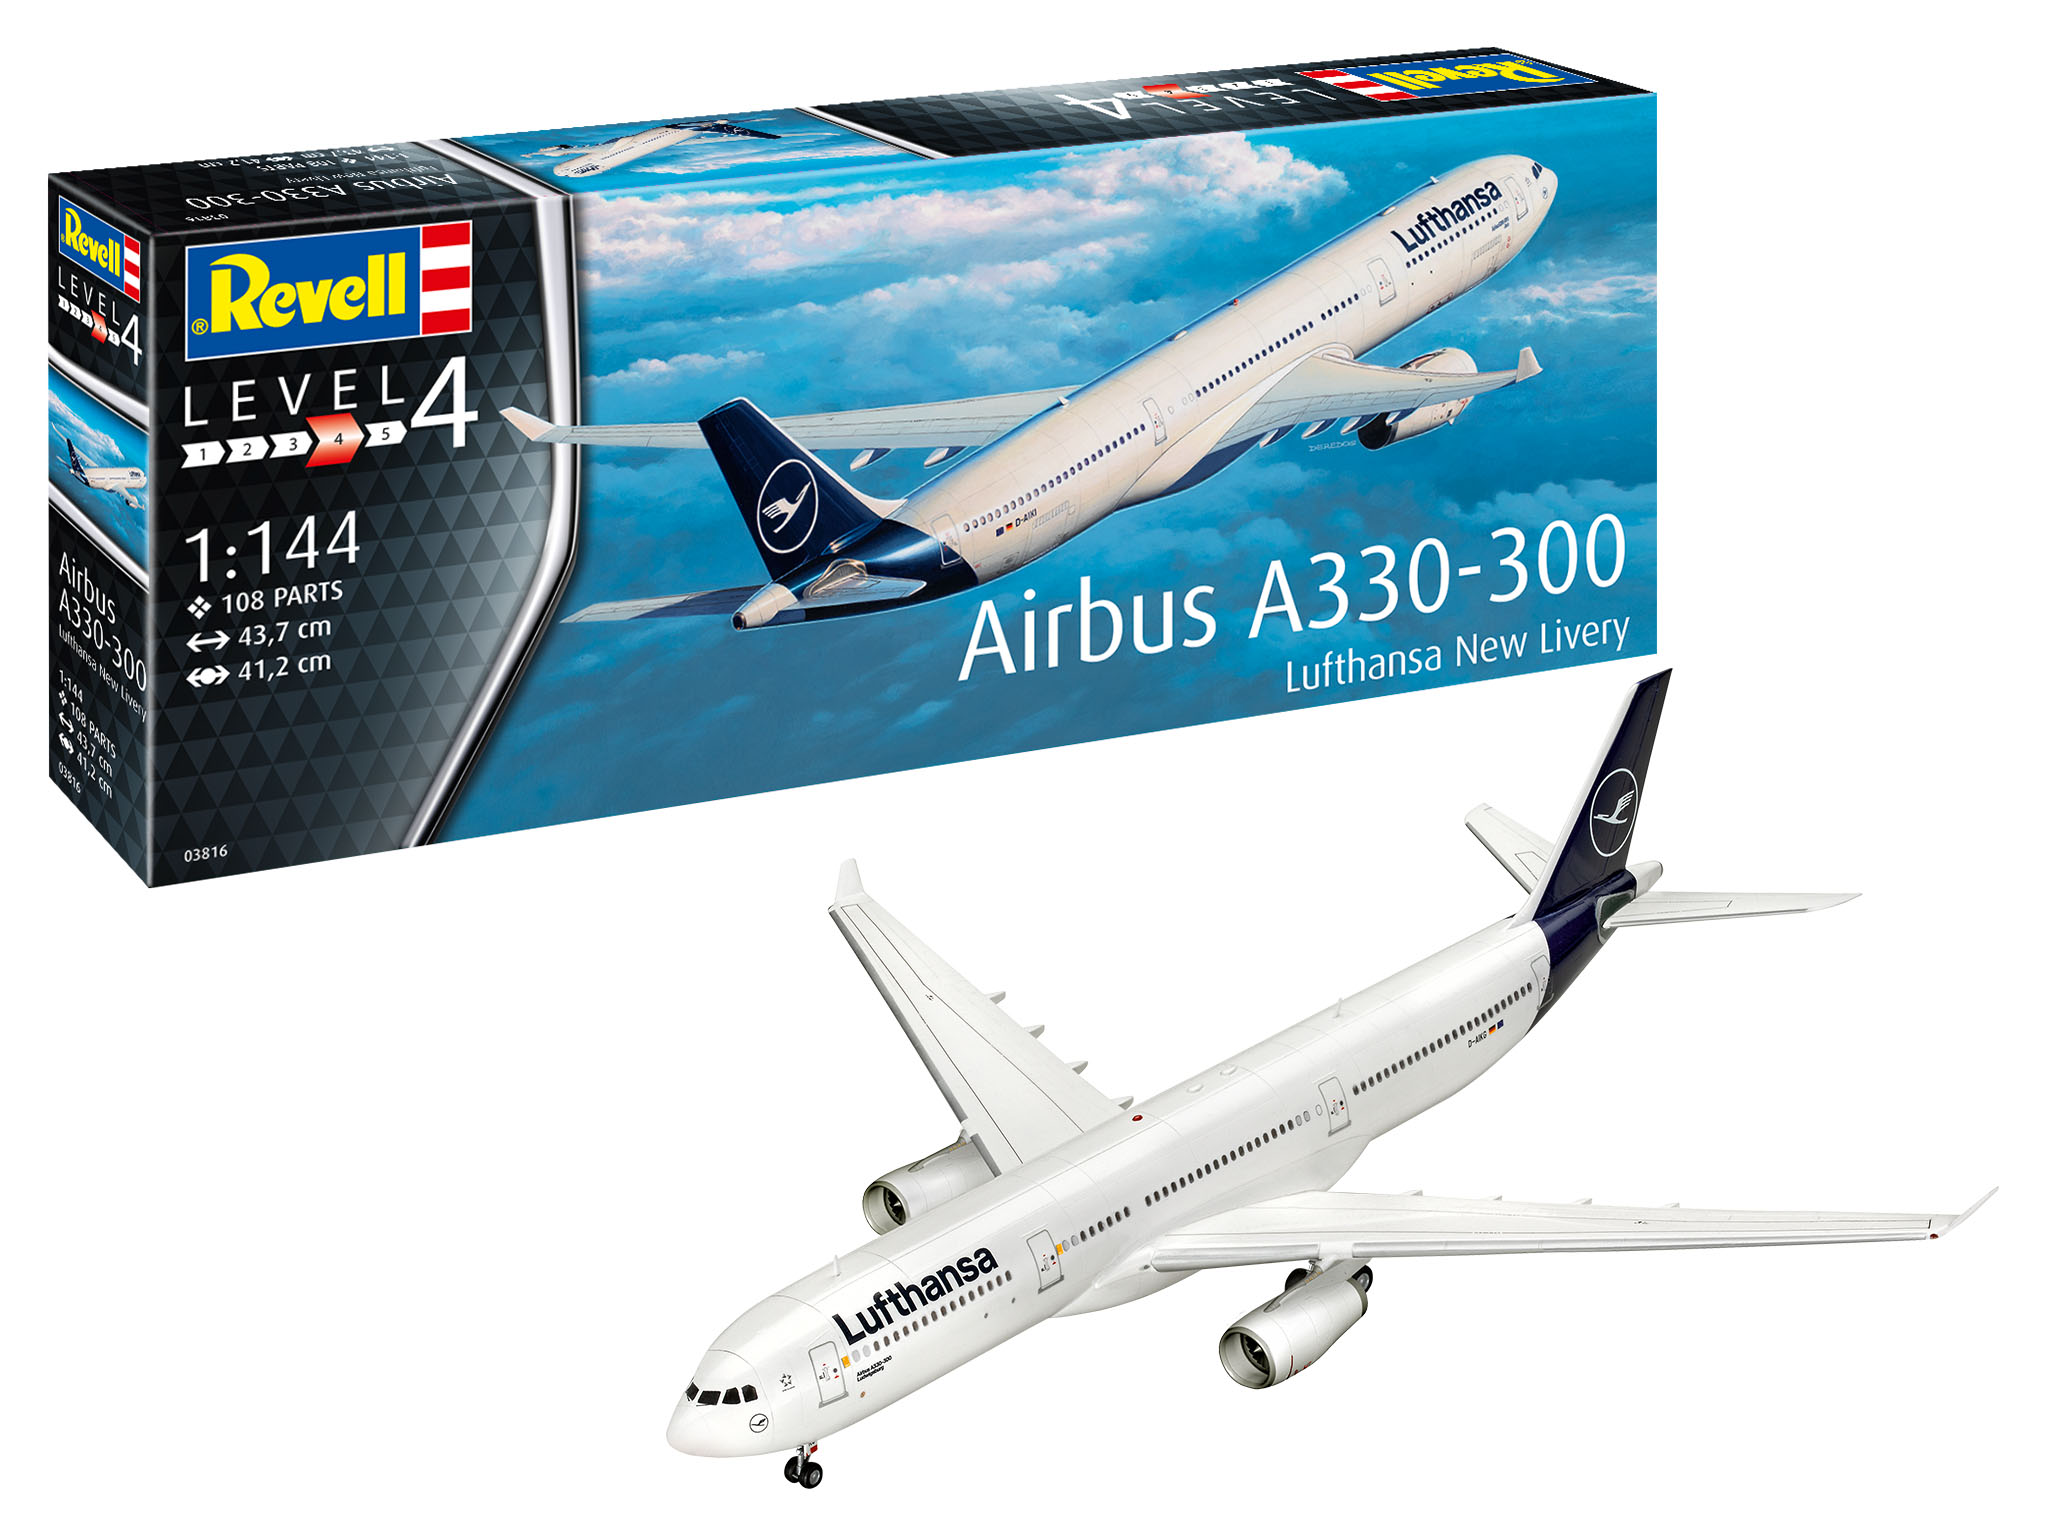 1:144 Airbus A330-300 Lufthansa New Livery